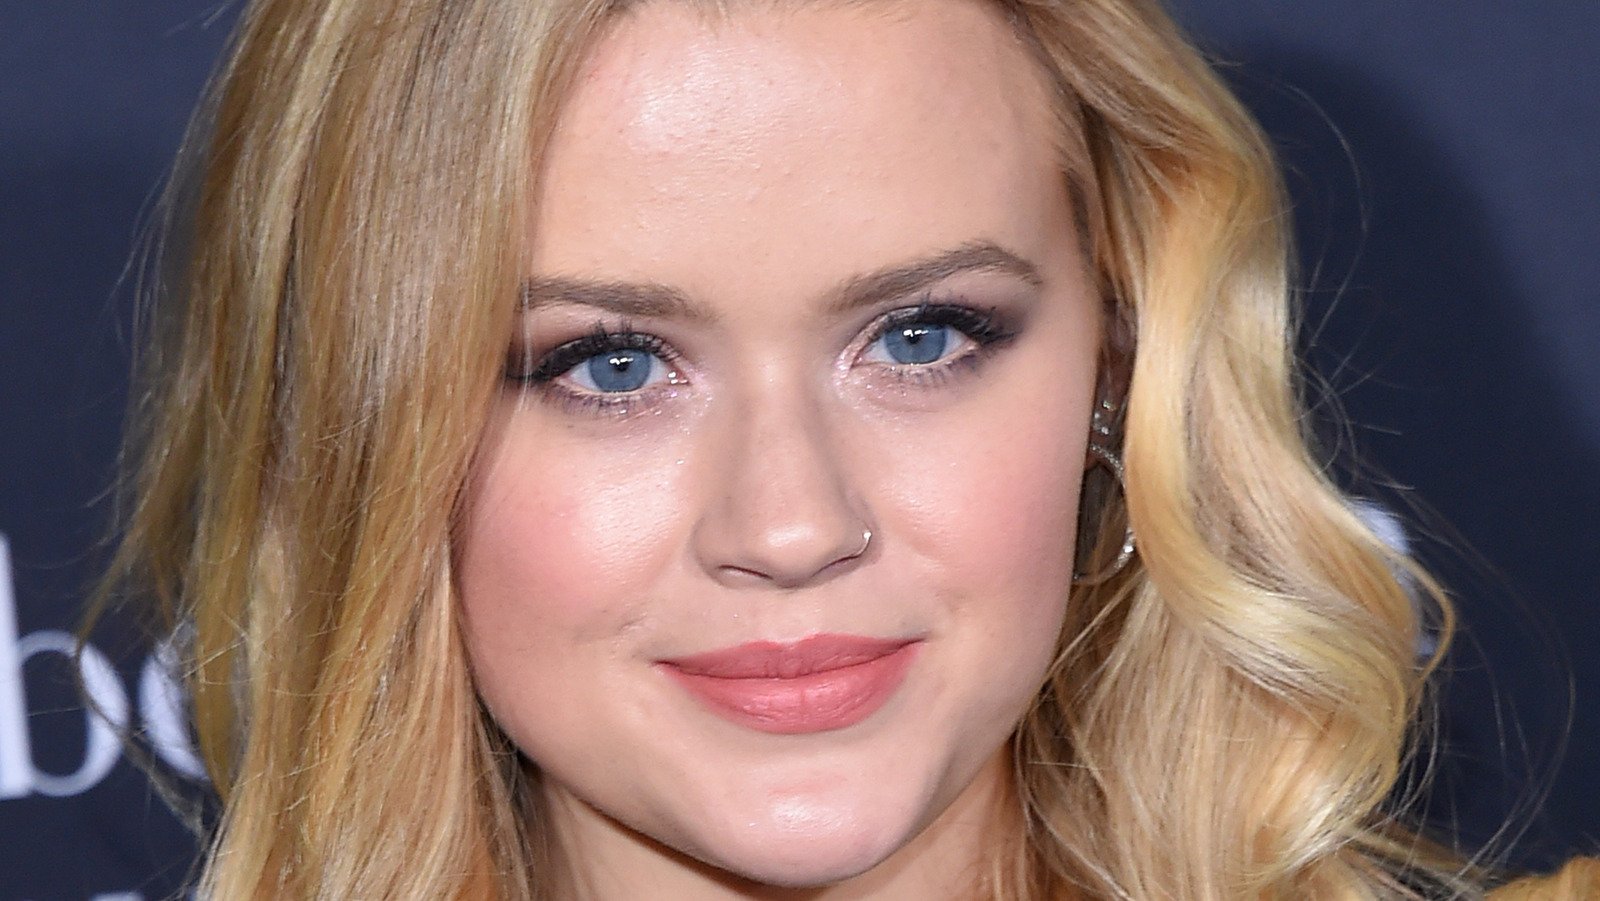 Reese Witherspoon's Daughter Has Grown Up To Be Her Twin